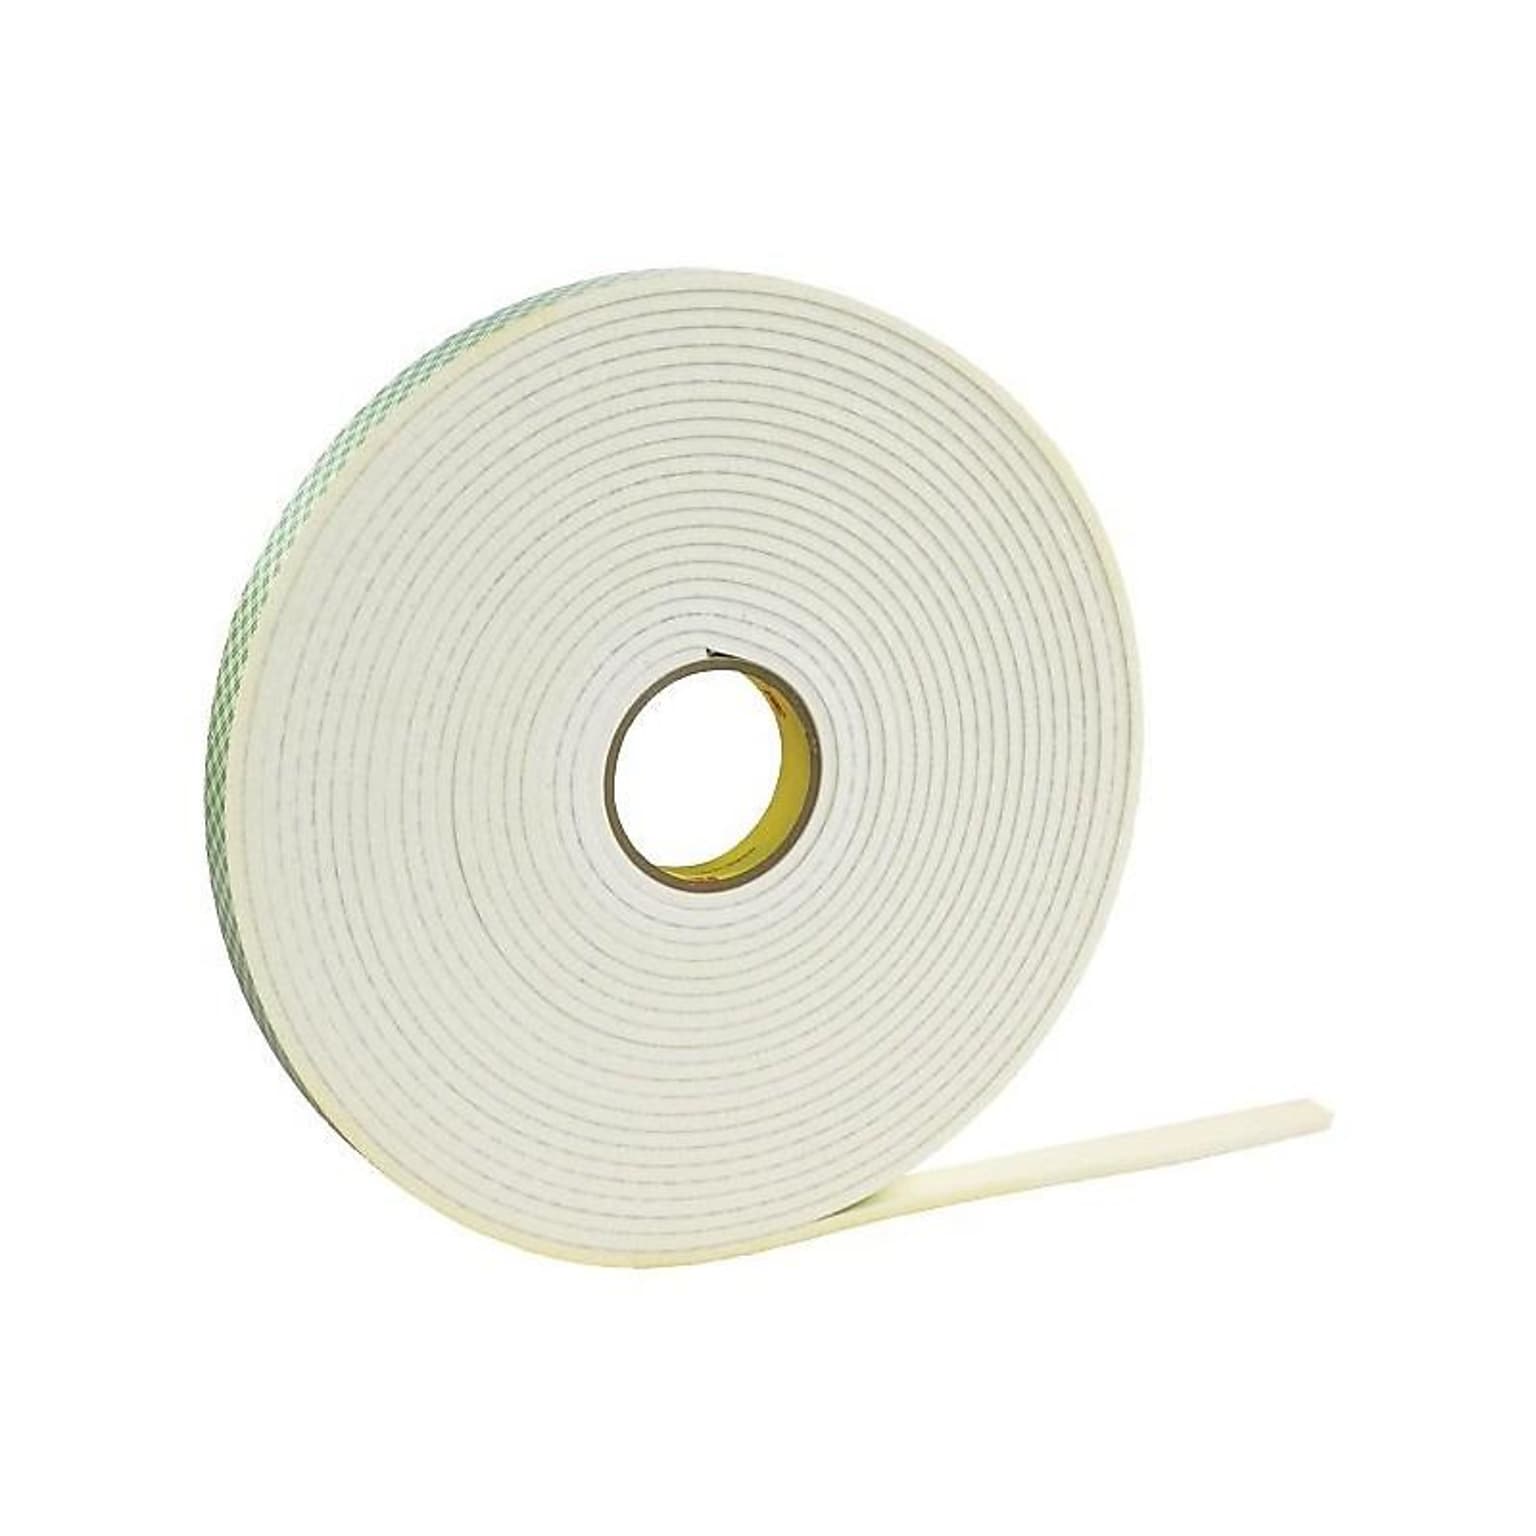 3M 4008 Double-Sided Tape, 0.75 x 36 Yds., White (T95440081PK)